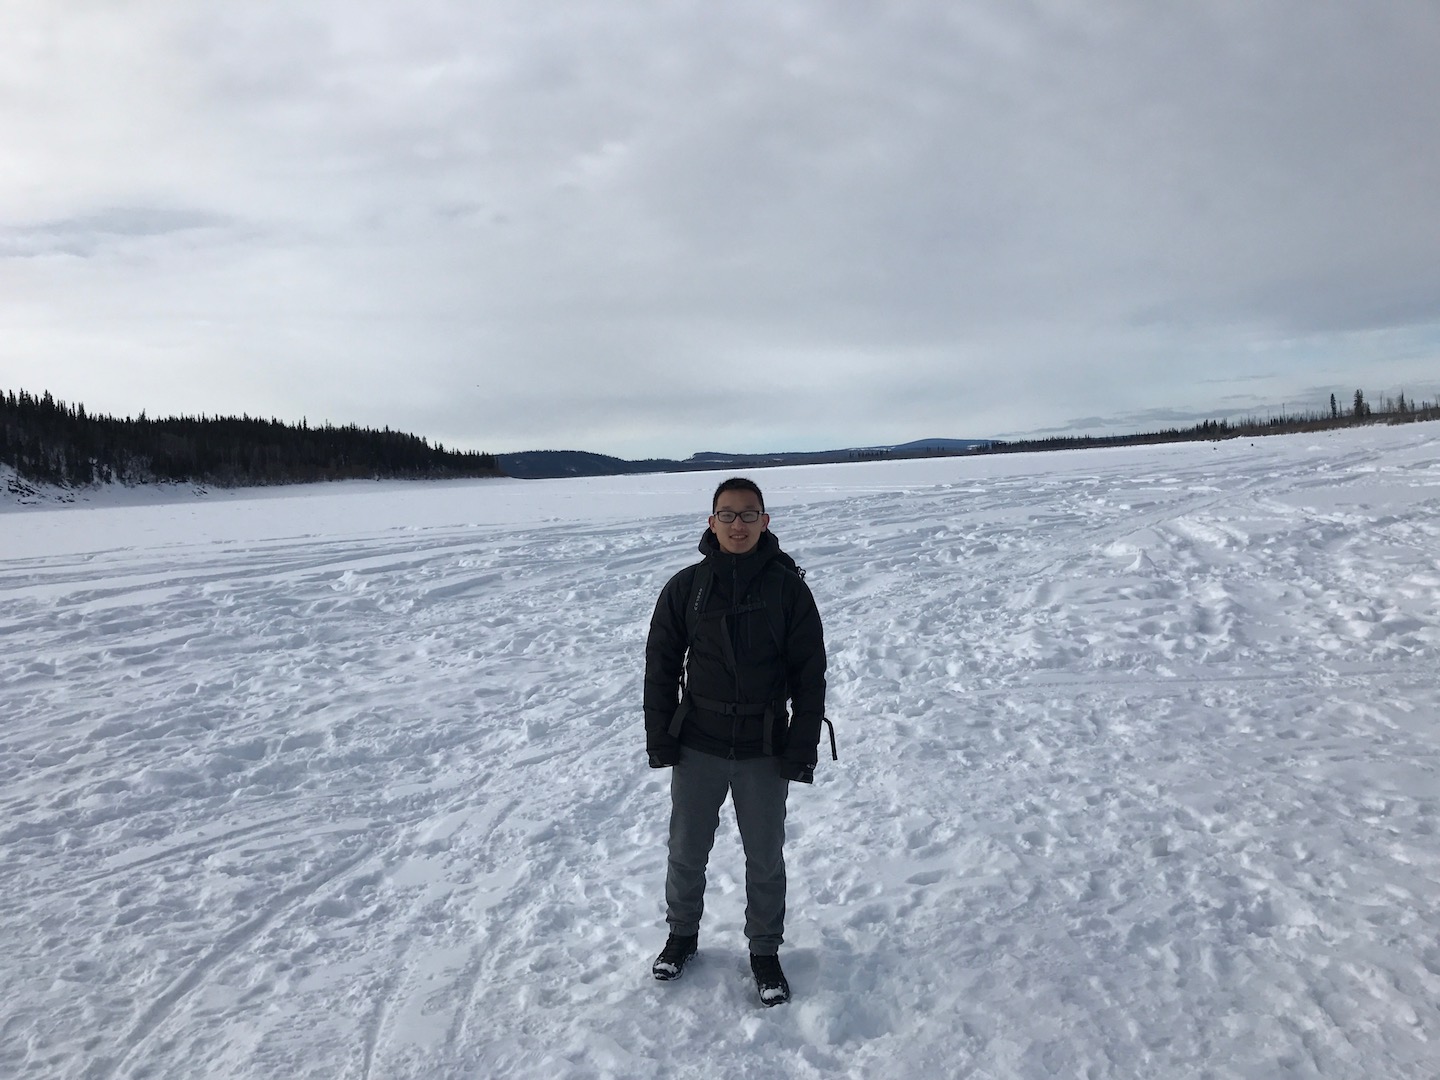 On the frozen banks of the Yukon River